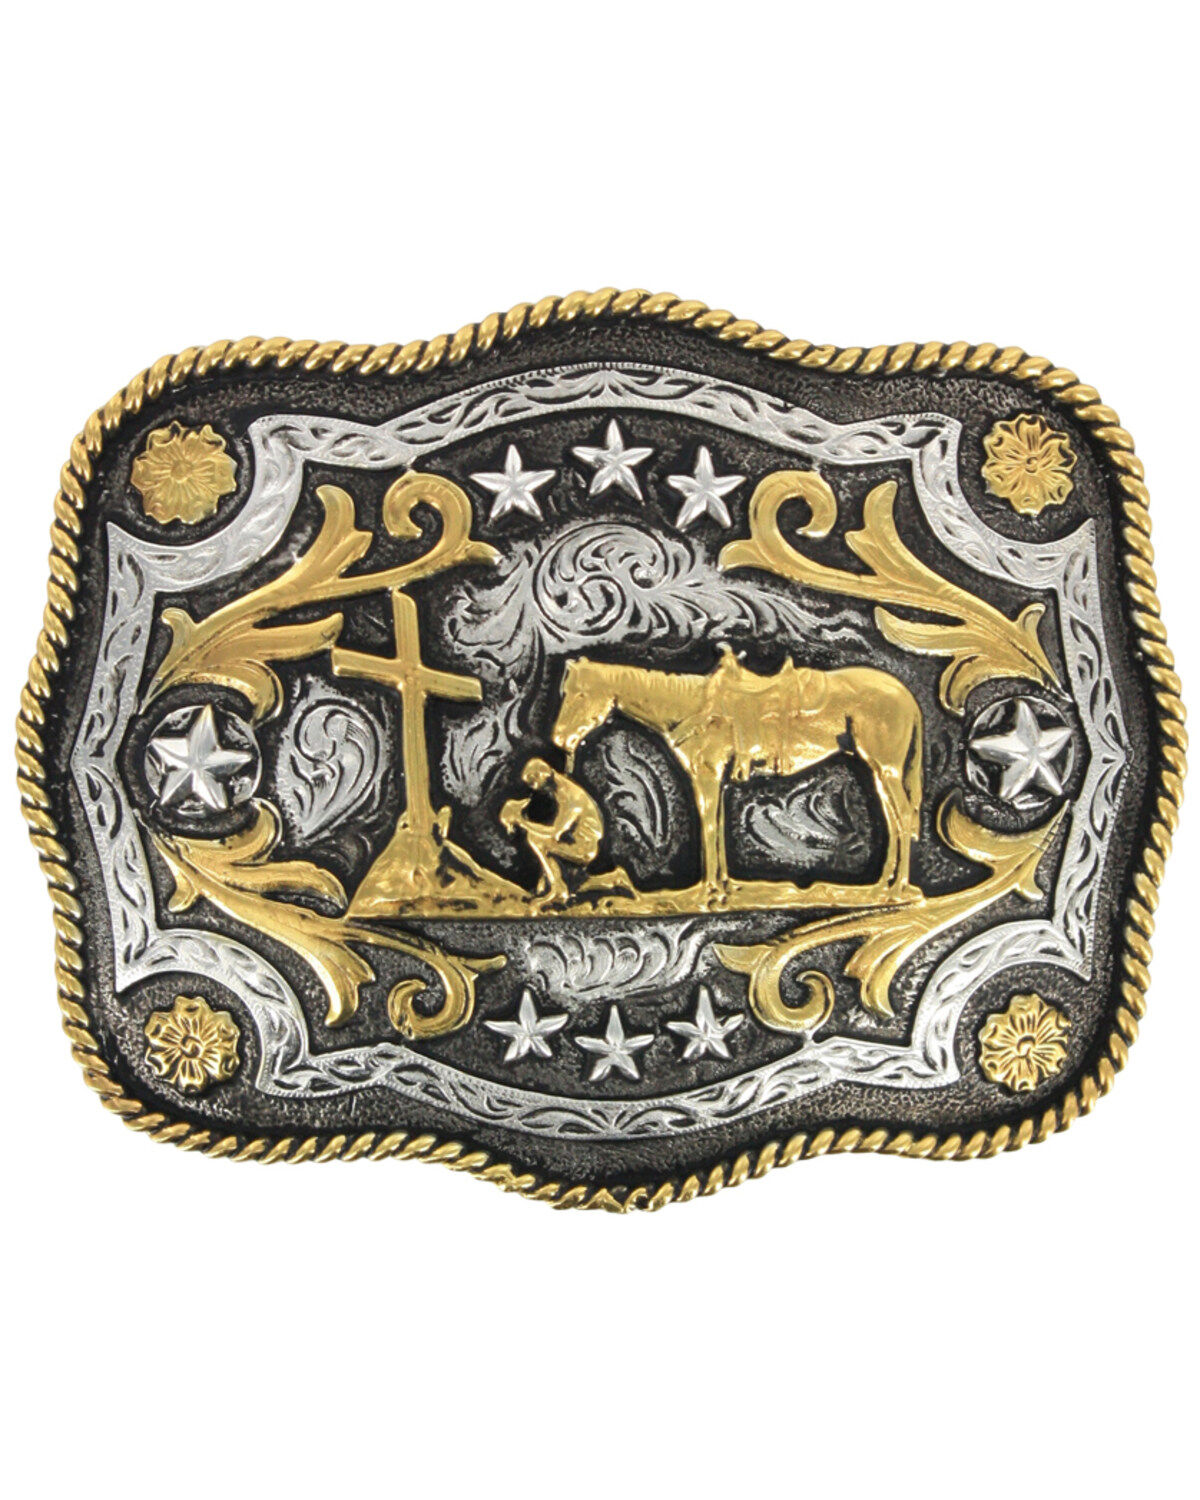 Rectange Cowgirl Up Boots Western Belt Buckle